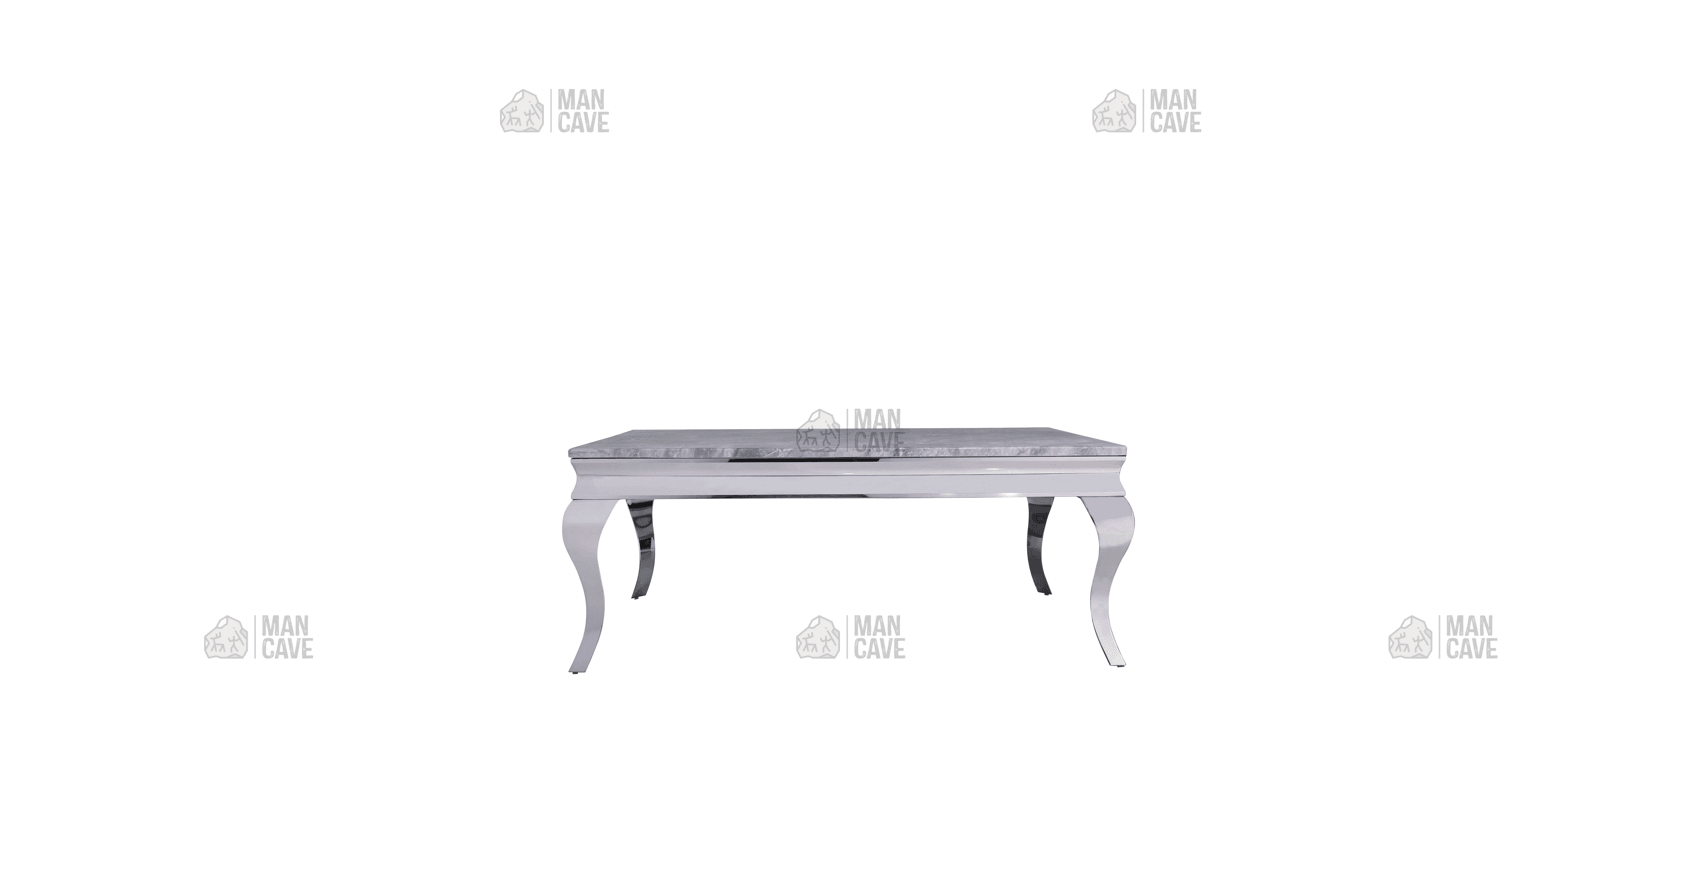 Liyana Marble Coffee Table - Grey - mancavesuperstore